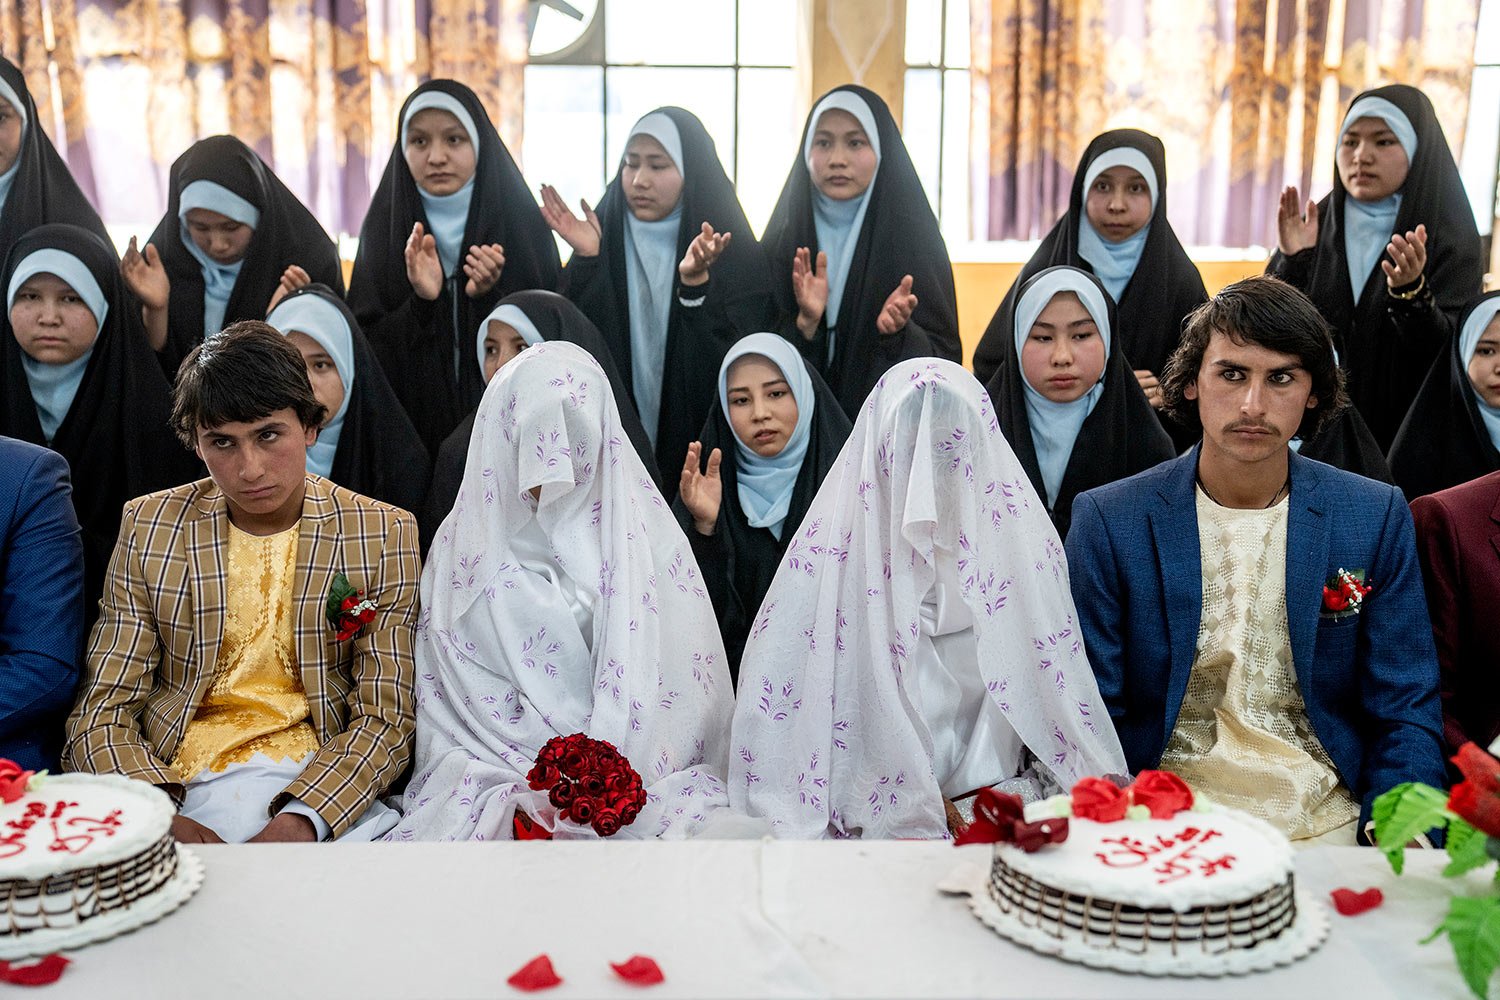  Afghan brides and grooms participate in a mass wedding ceremony during the International Women's Day, in Kabul, Afghanistan, Wednesday, March 8, 2023. (AP Photo/Ebrahim Noroozi) 